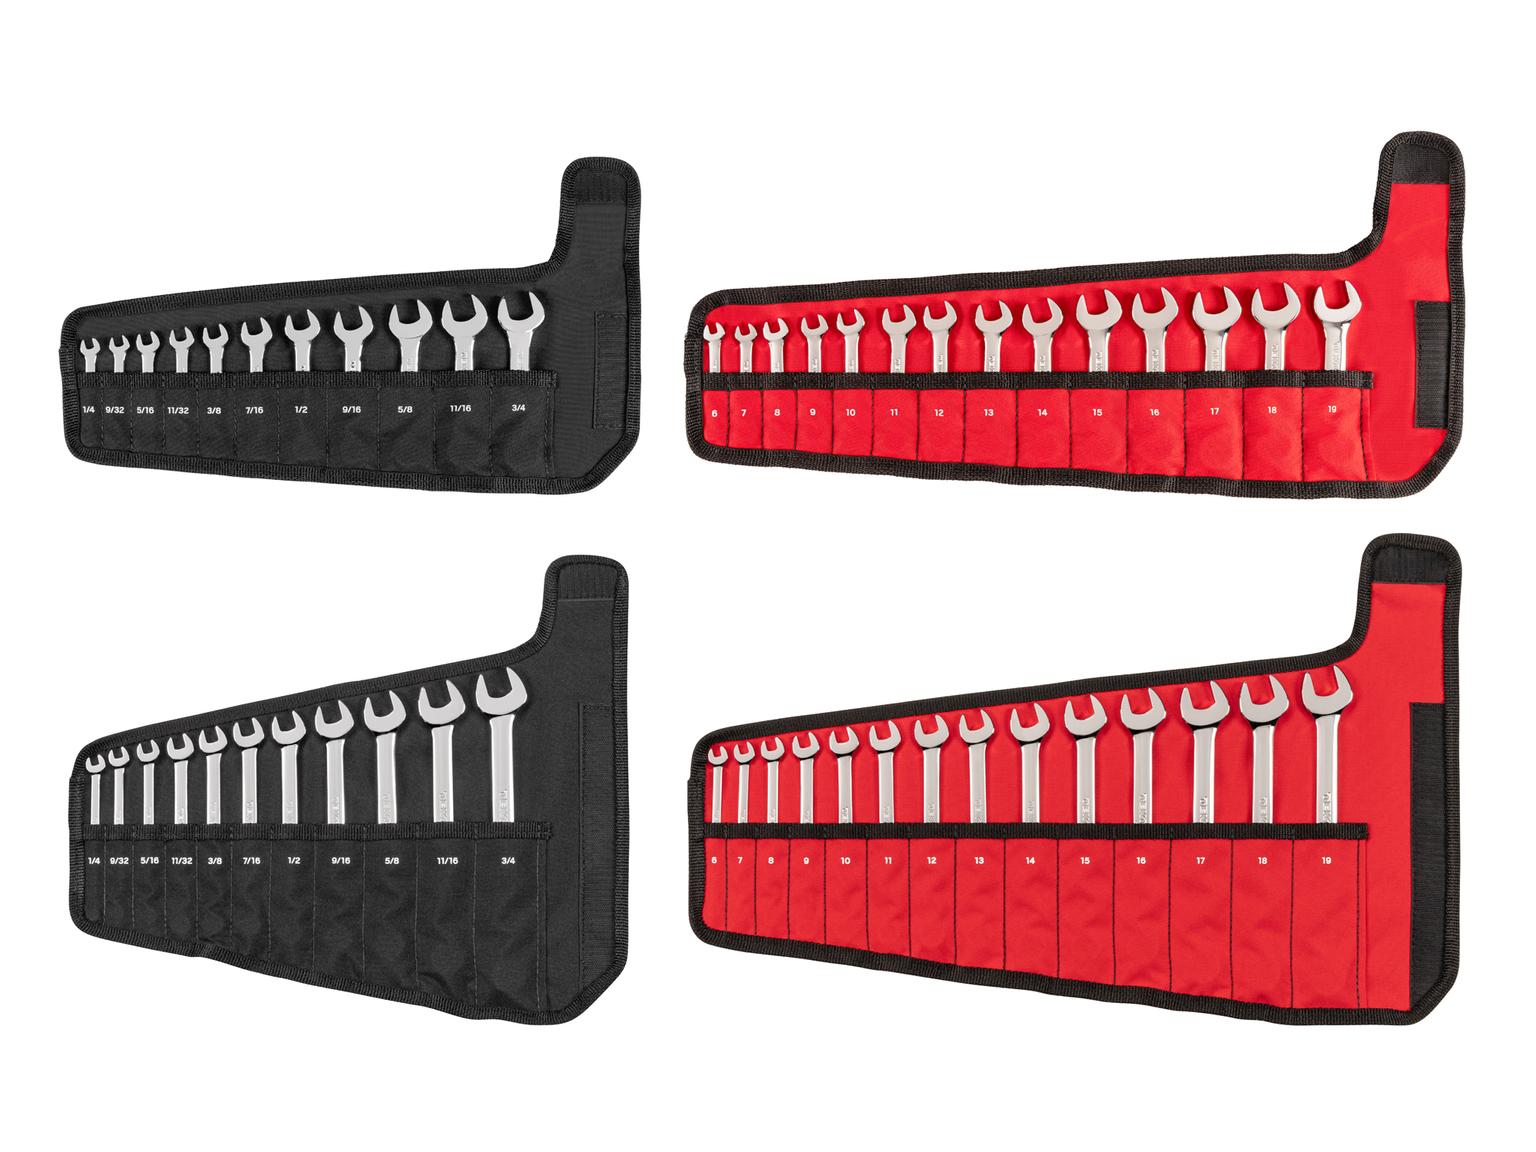 Stubby and Standard Length Combination Wrench Set, 50-Piece (Pouch)